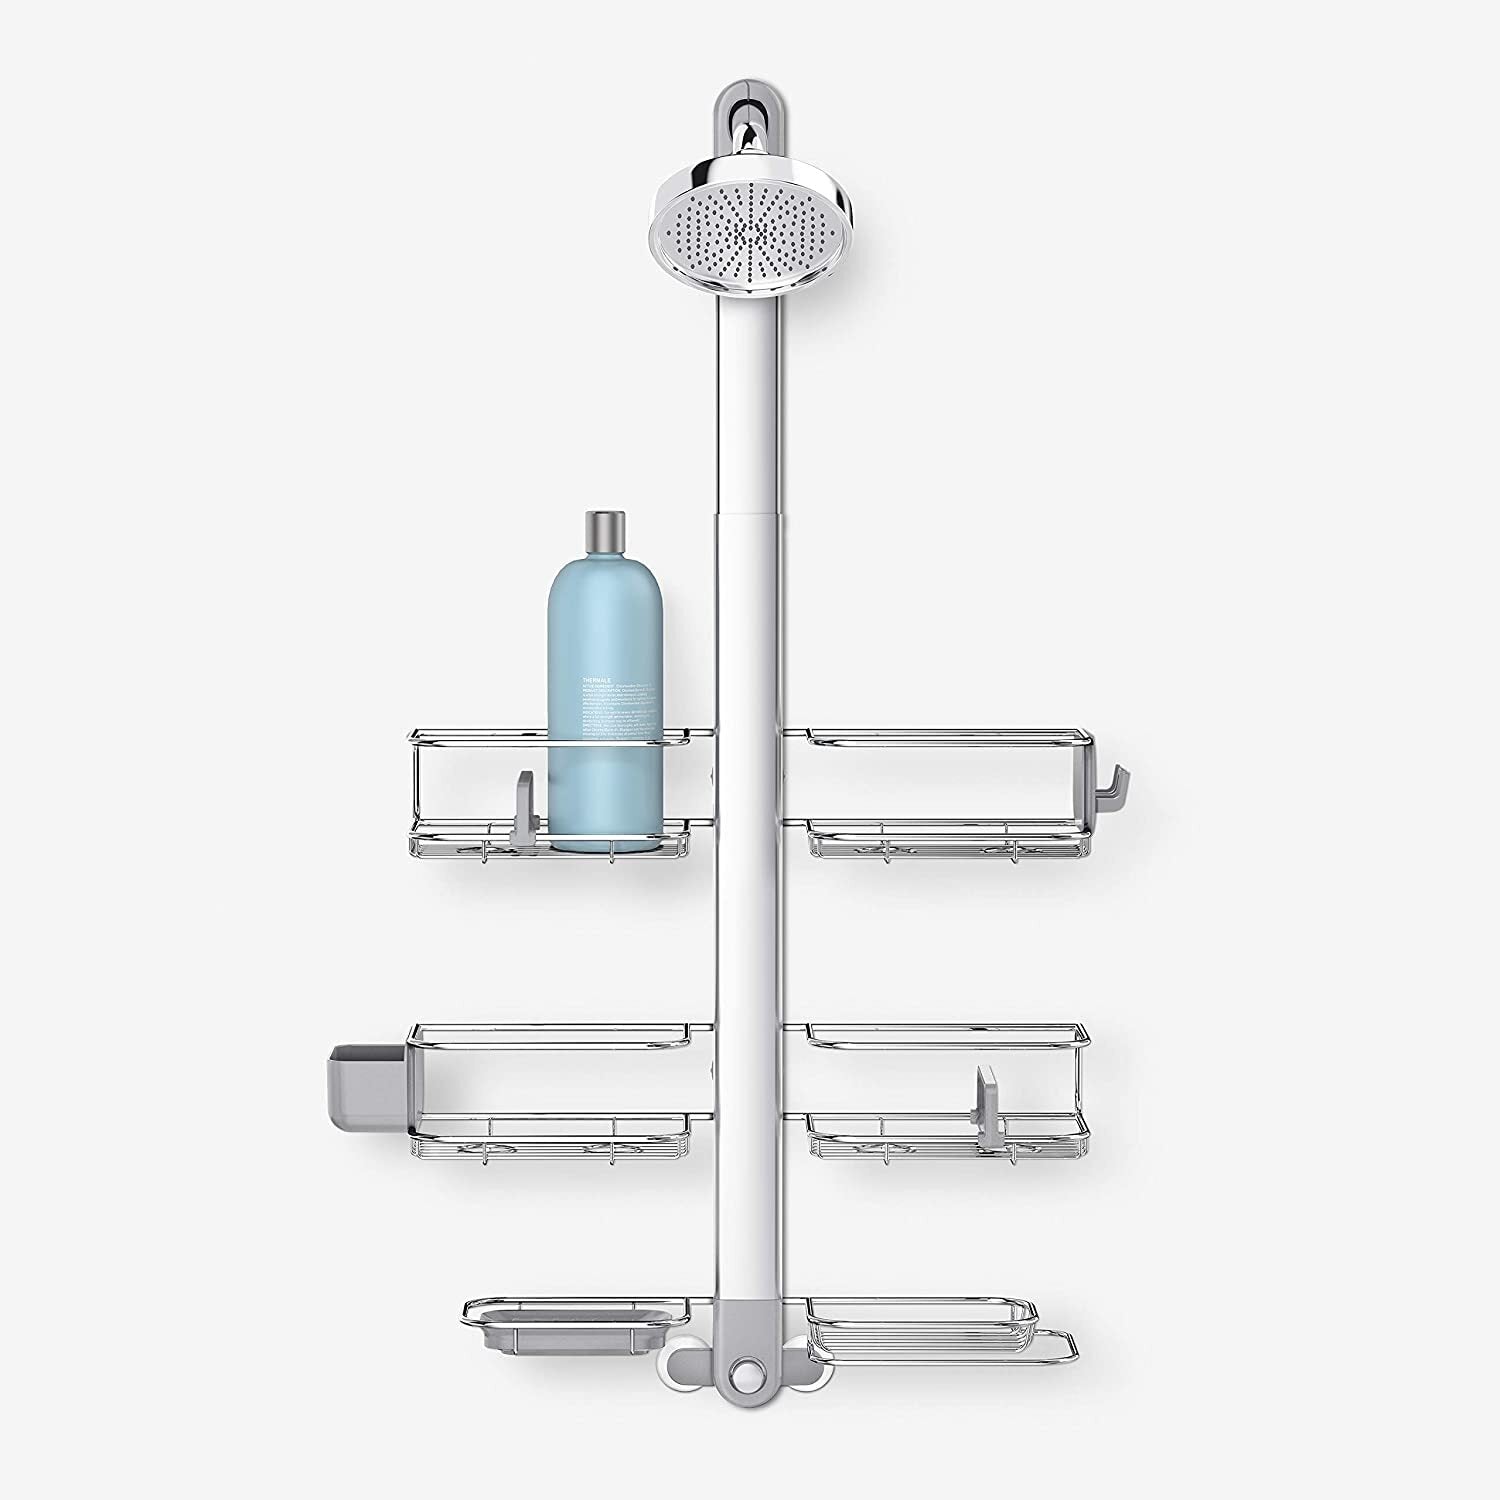 Extending Adjustable Shower Caddy in Anodized Aluminum and Stainless Steel